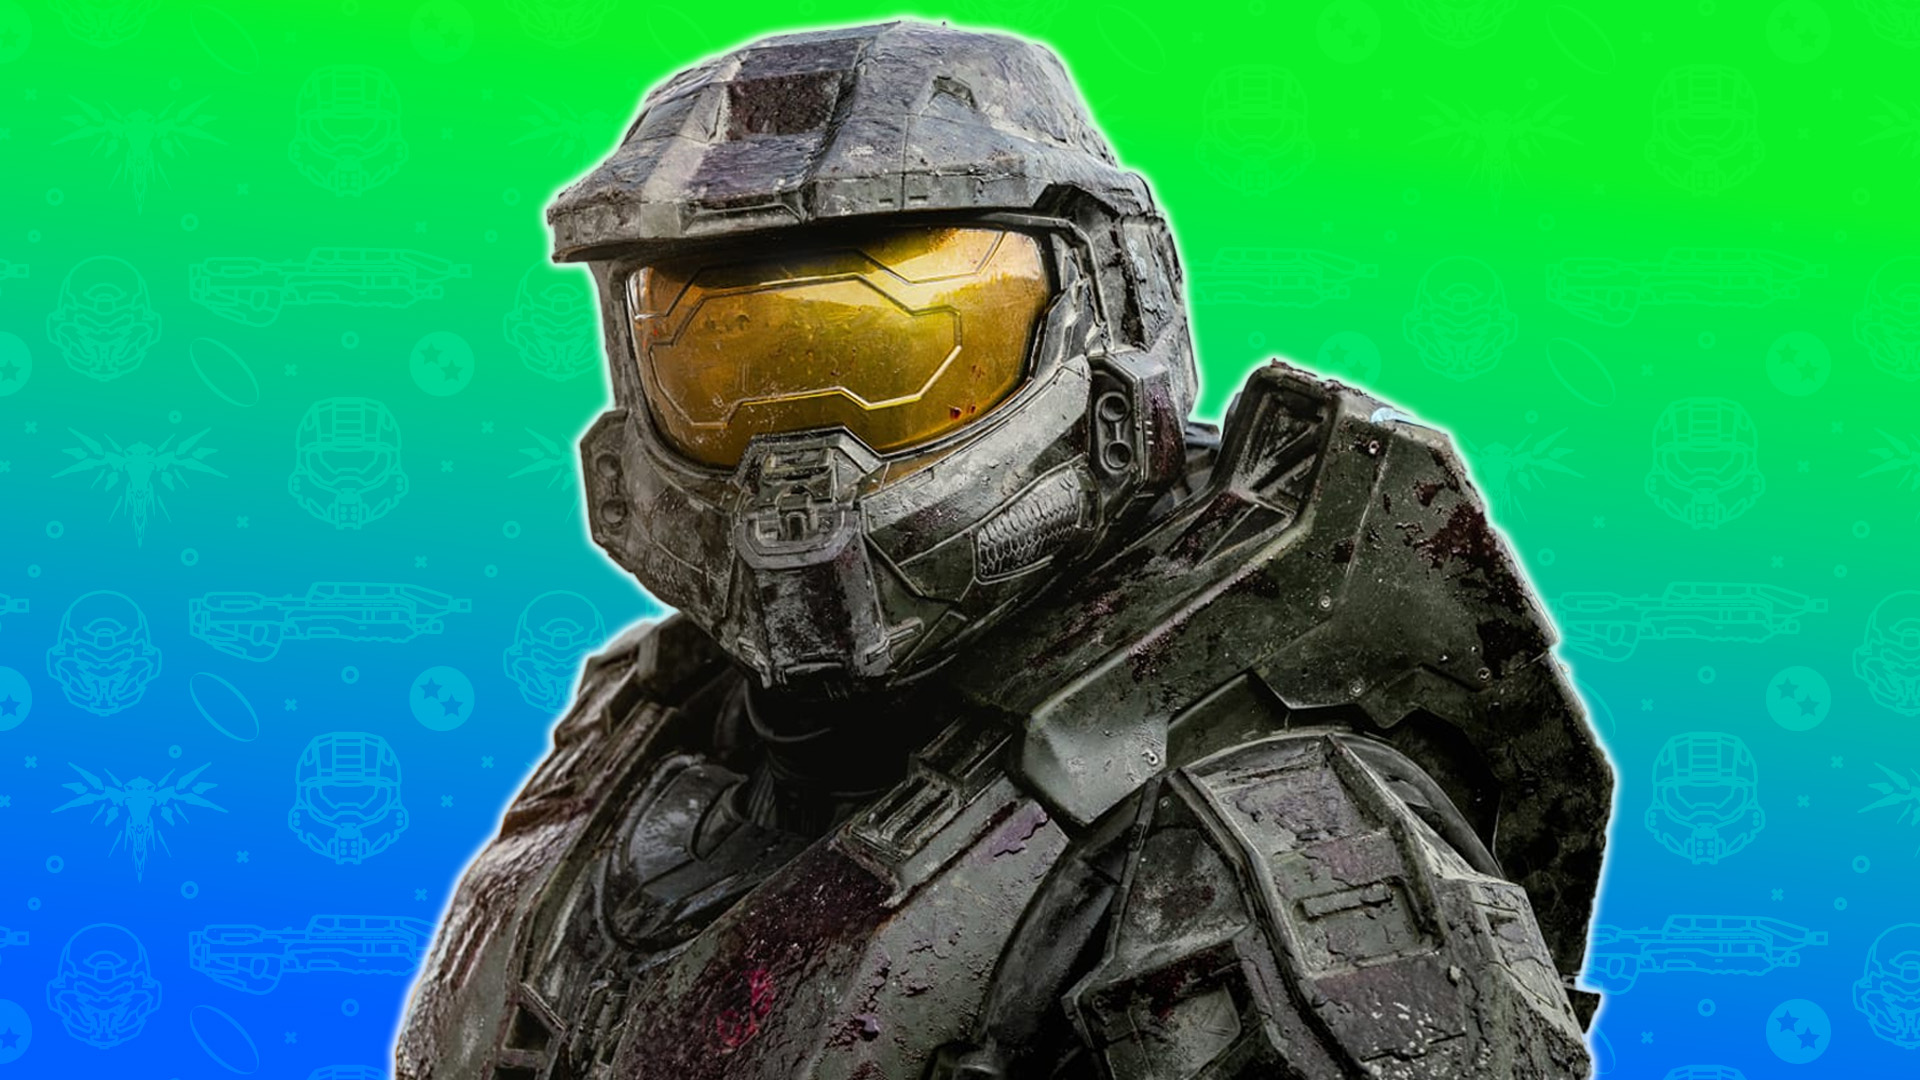 Paramount+ Brings More Halo to Xbox Game Pass Ultimate - Xbox Wire